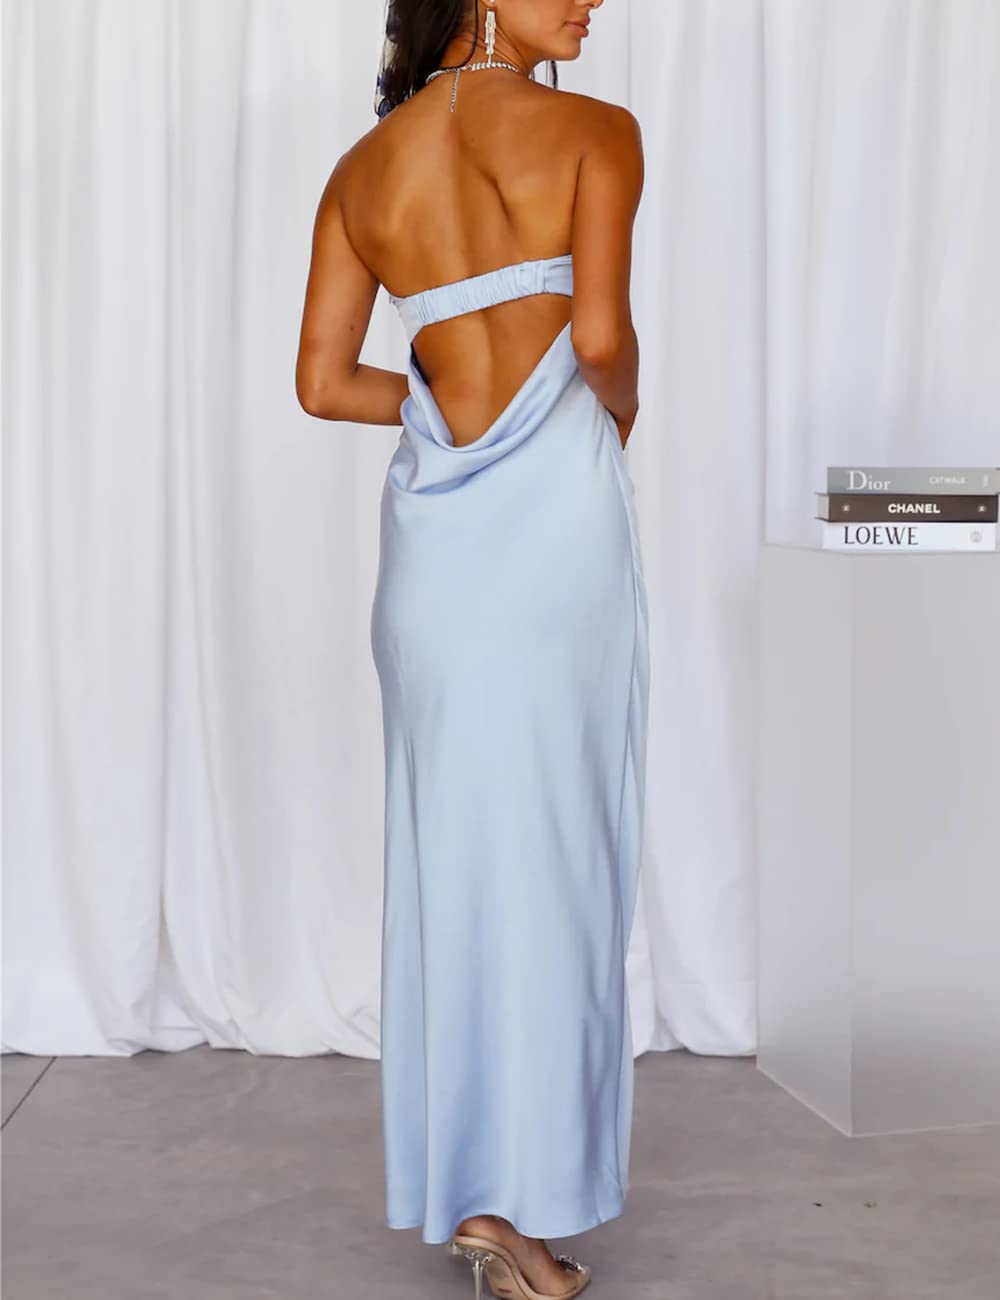 Realtix Satin Silk Backless Tube Tops Maxi Dress for Women Low Back Hollow Out Elegant Strapless Long Dresses Wedding Guest